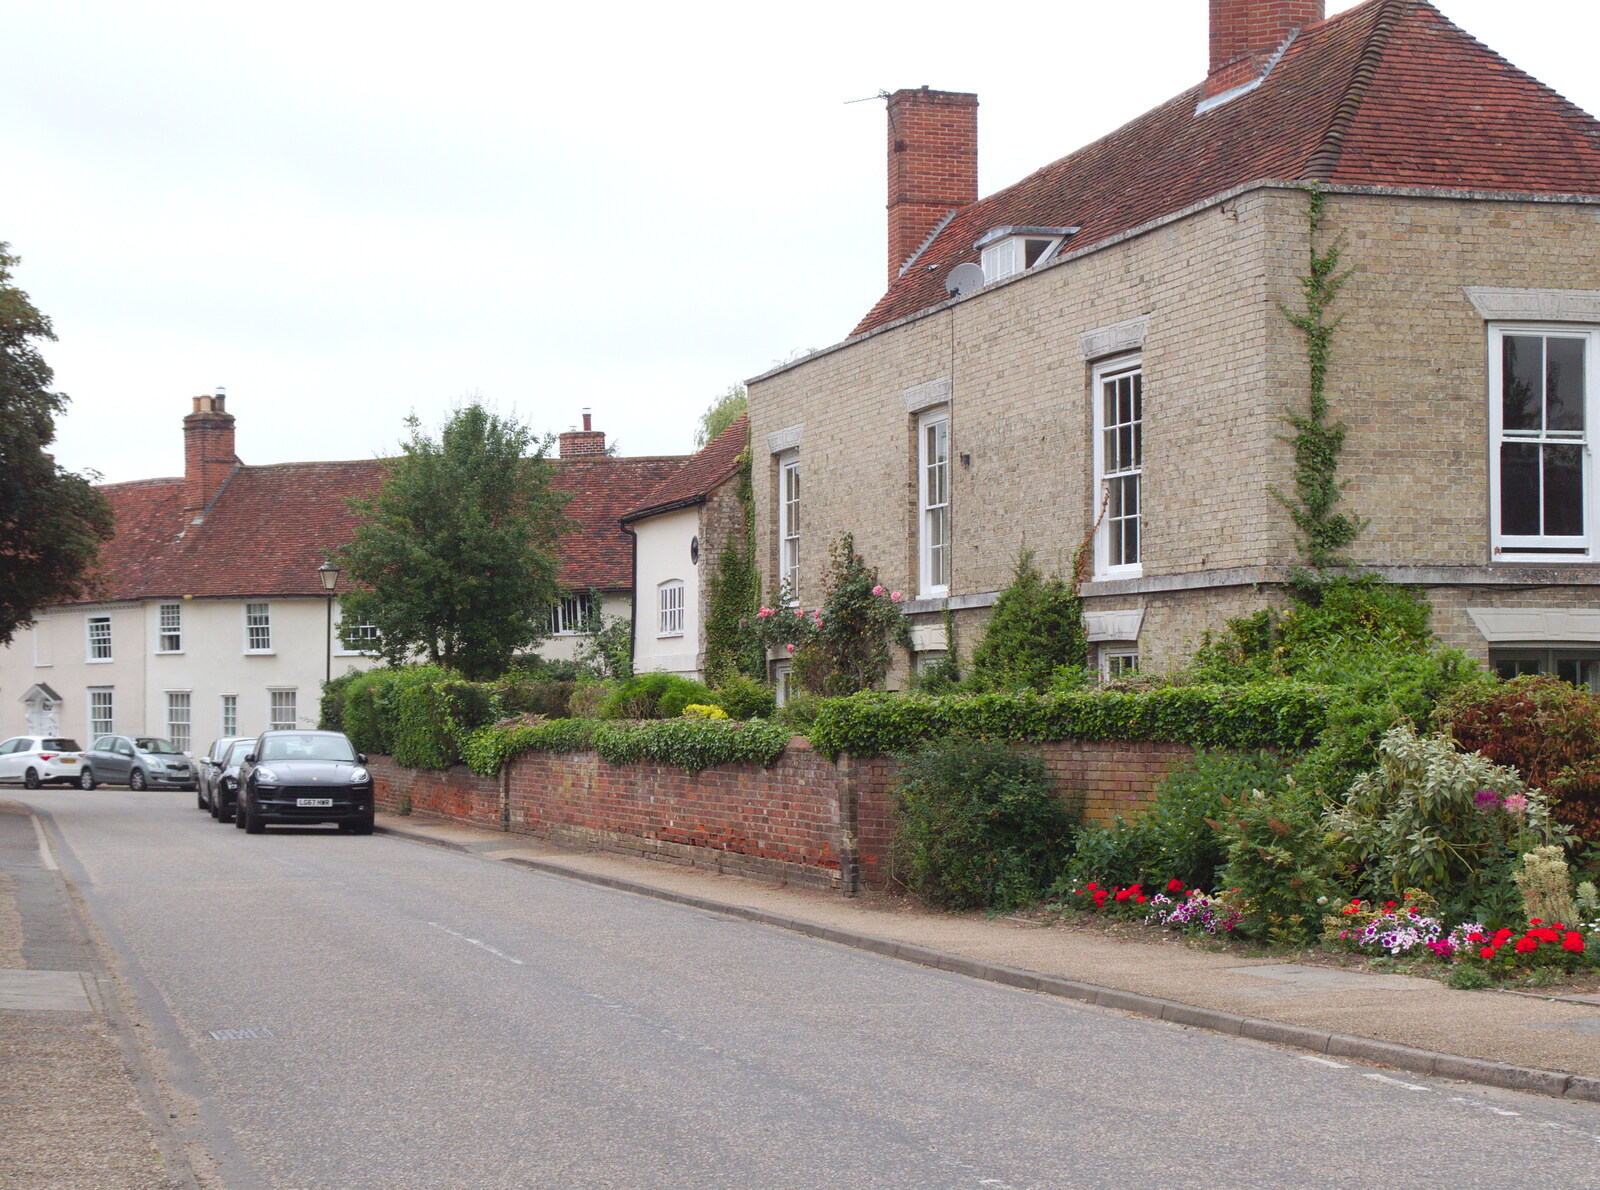 A Postcard from Boxford and BSCC at Pulham, Suffolk and Norfolk - 13th July 2019: A nice big brick-built house